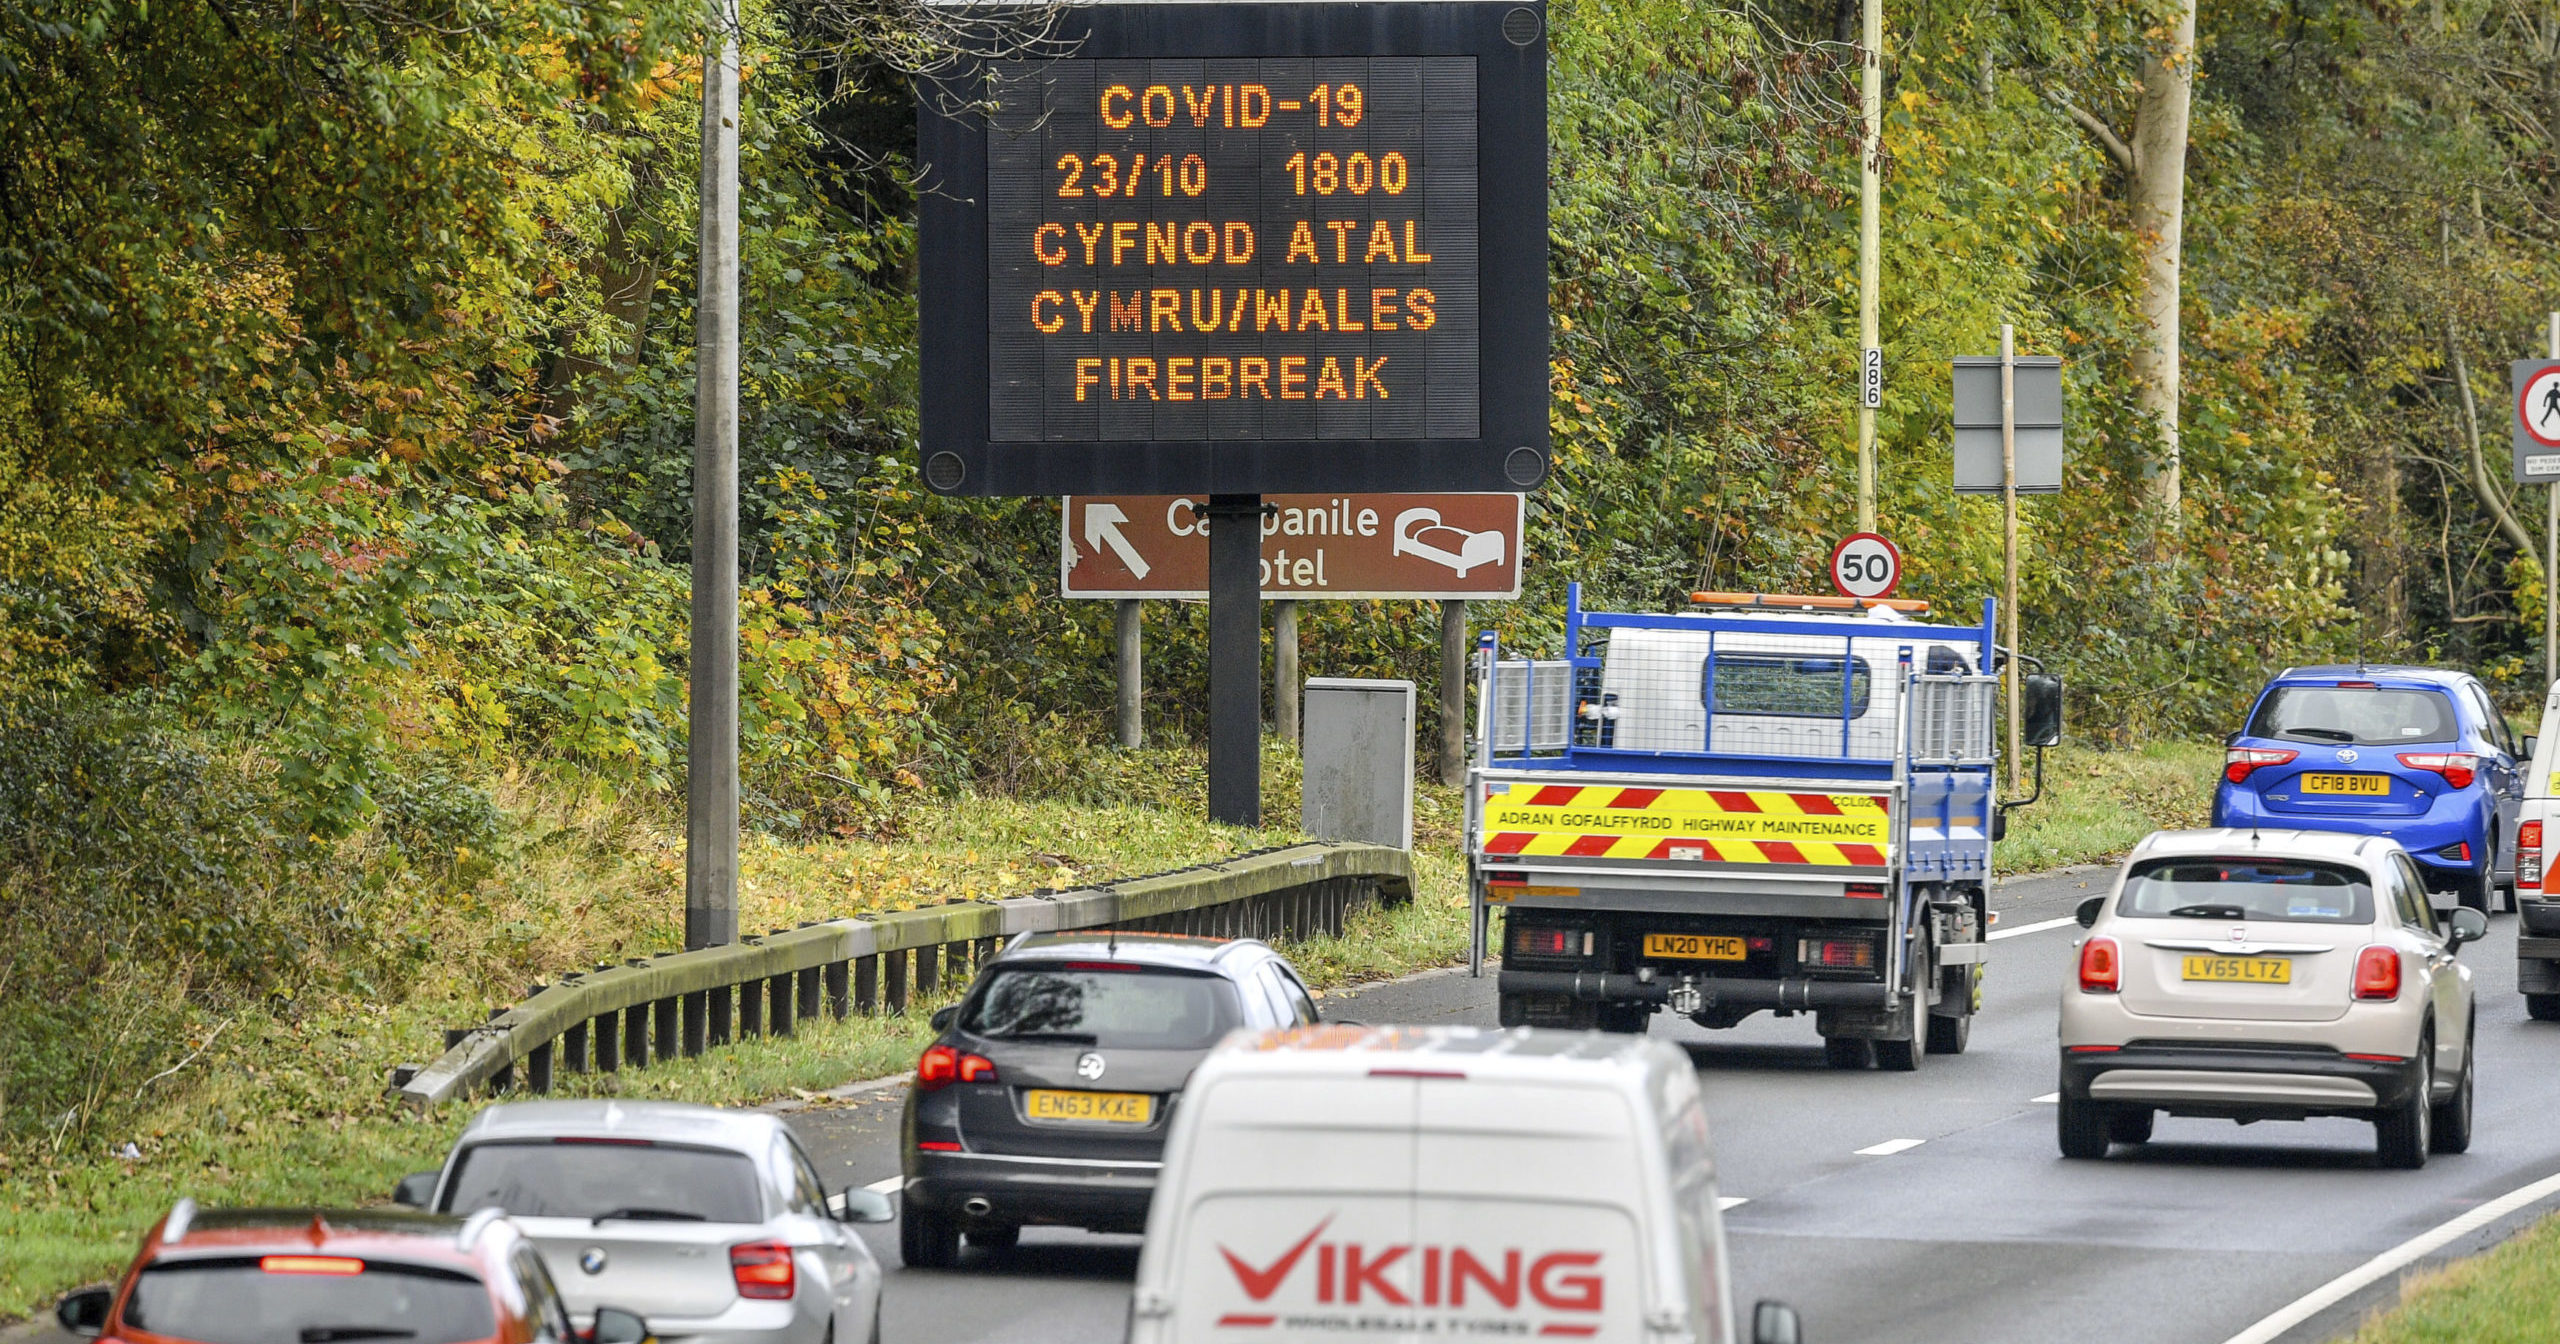 A sign is seen on a road into Wales on Oct. 23, 2020.